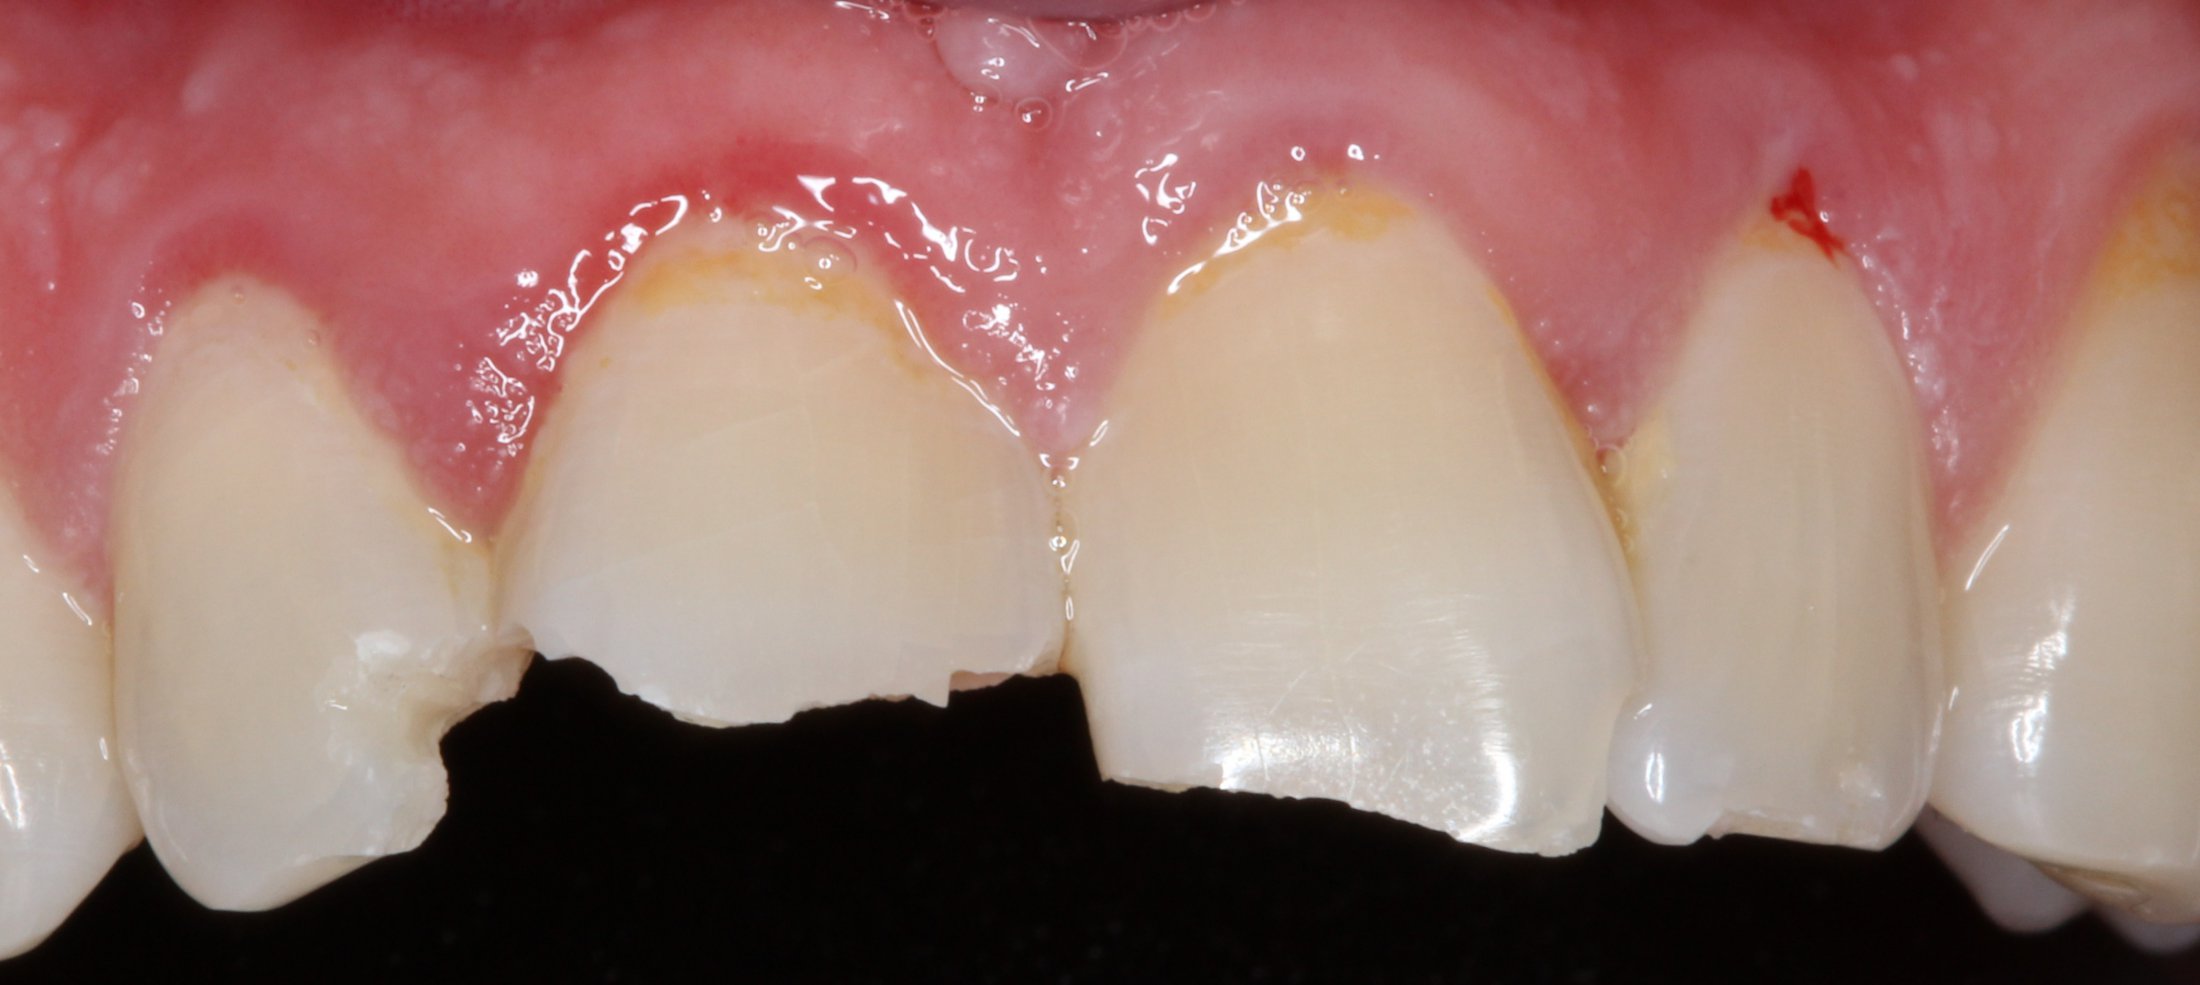 Patient's mouth before fixing chipped tooth